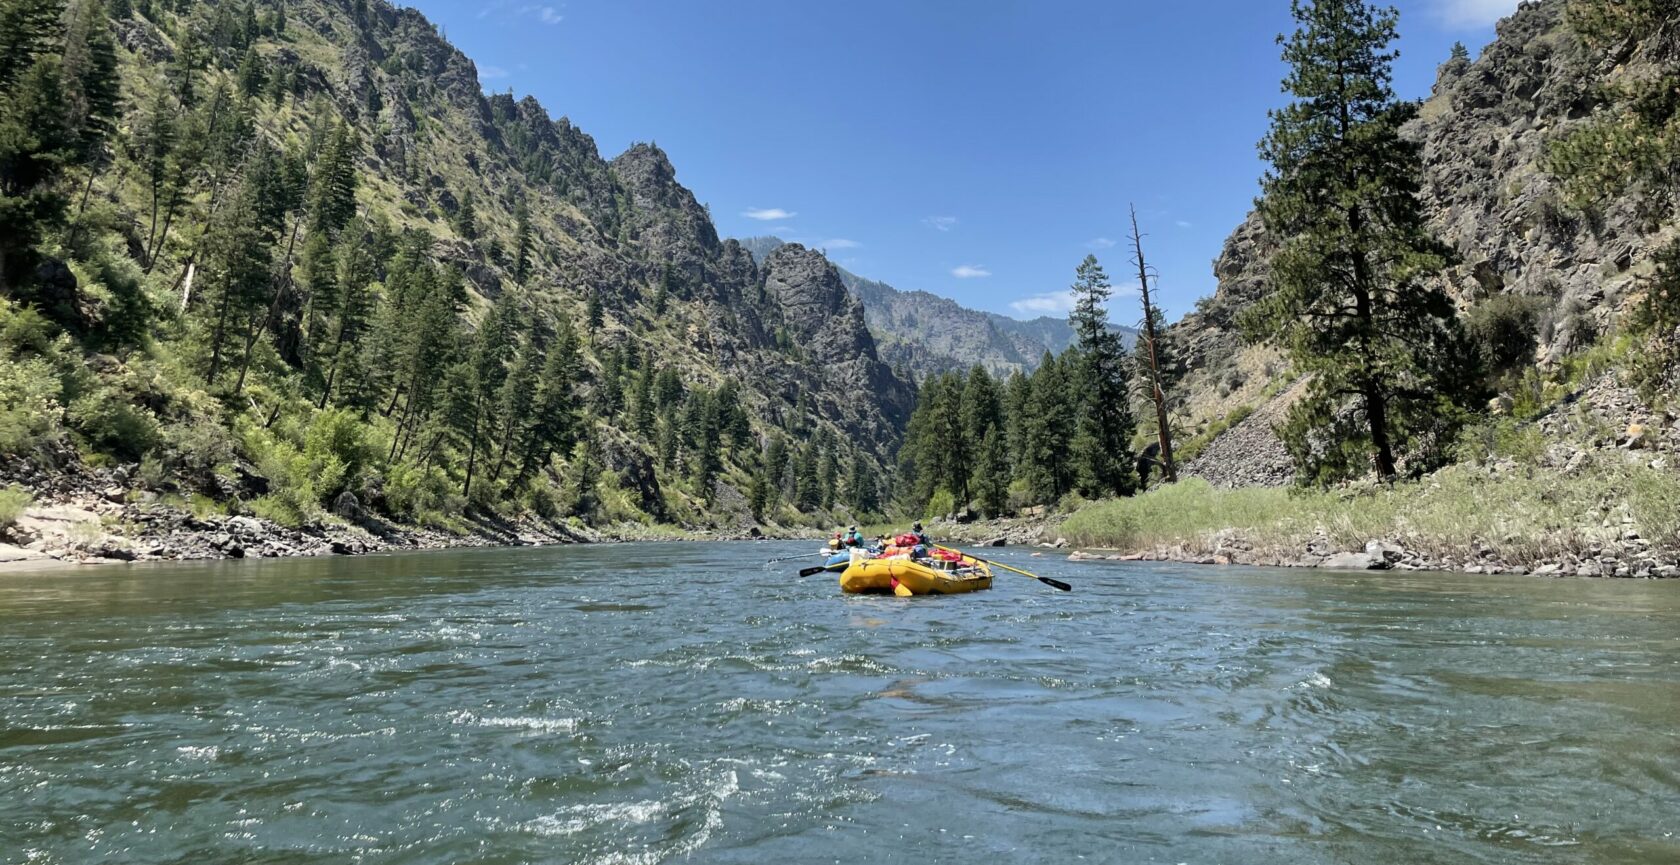 White Water Rafting on the Main Salmon River